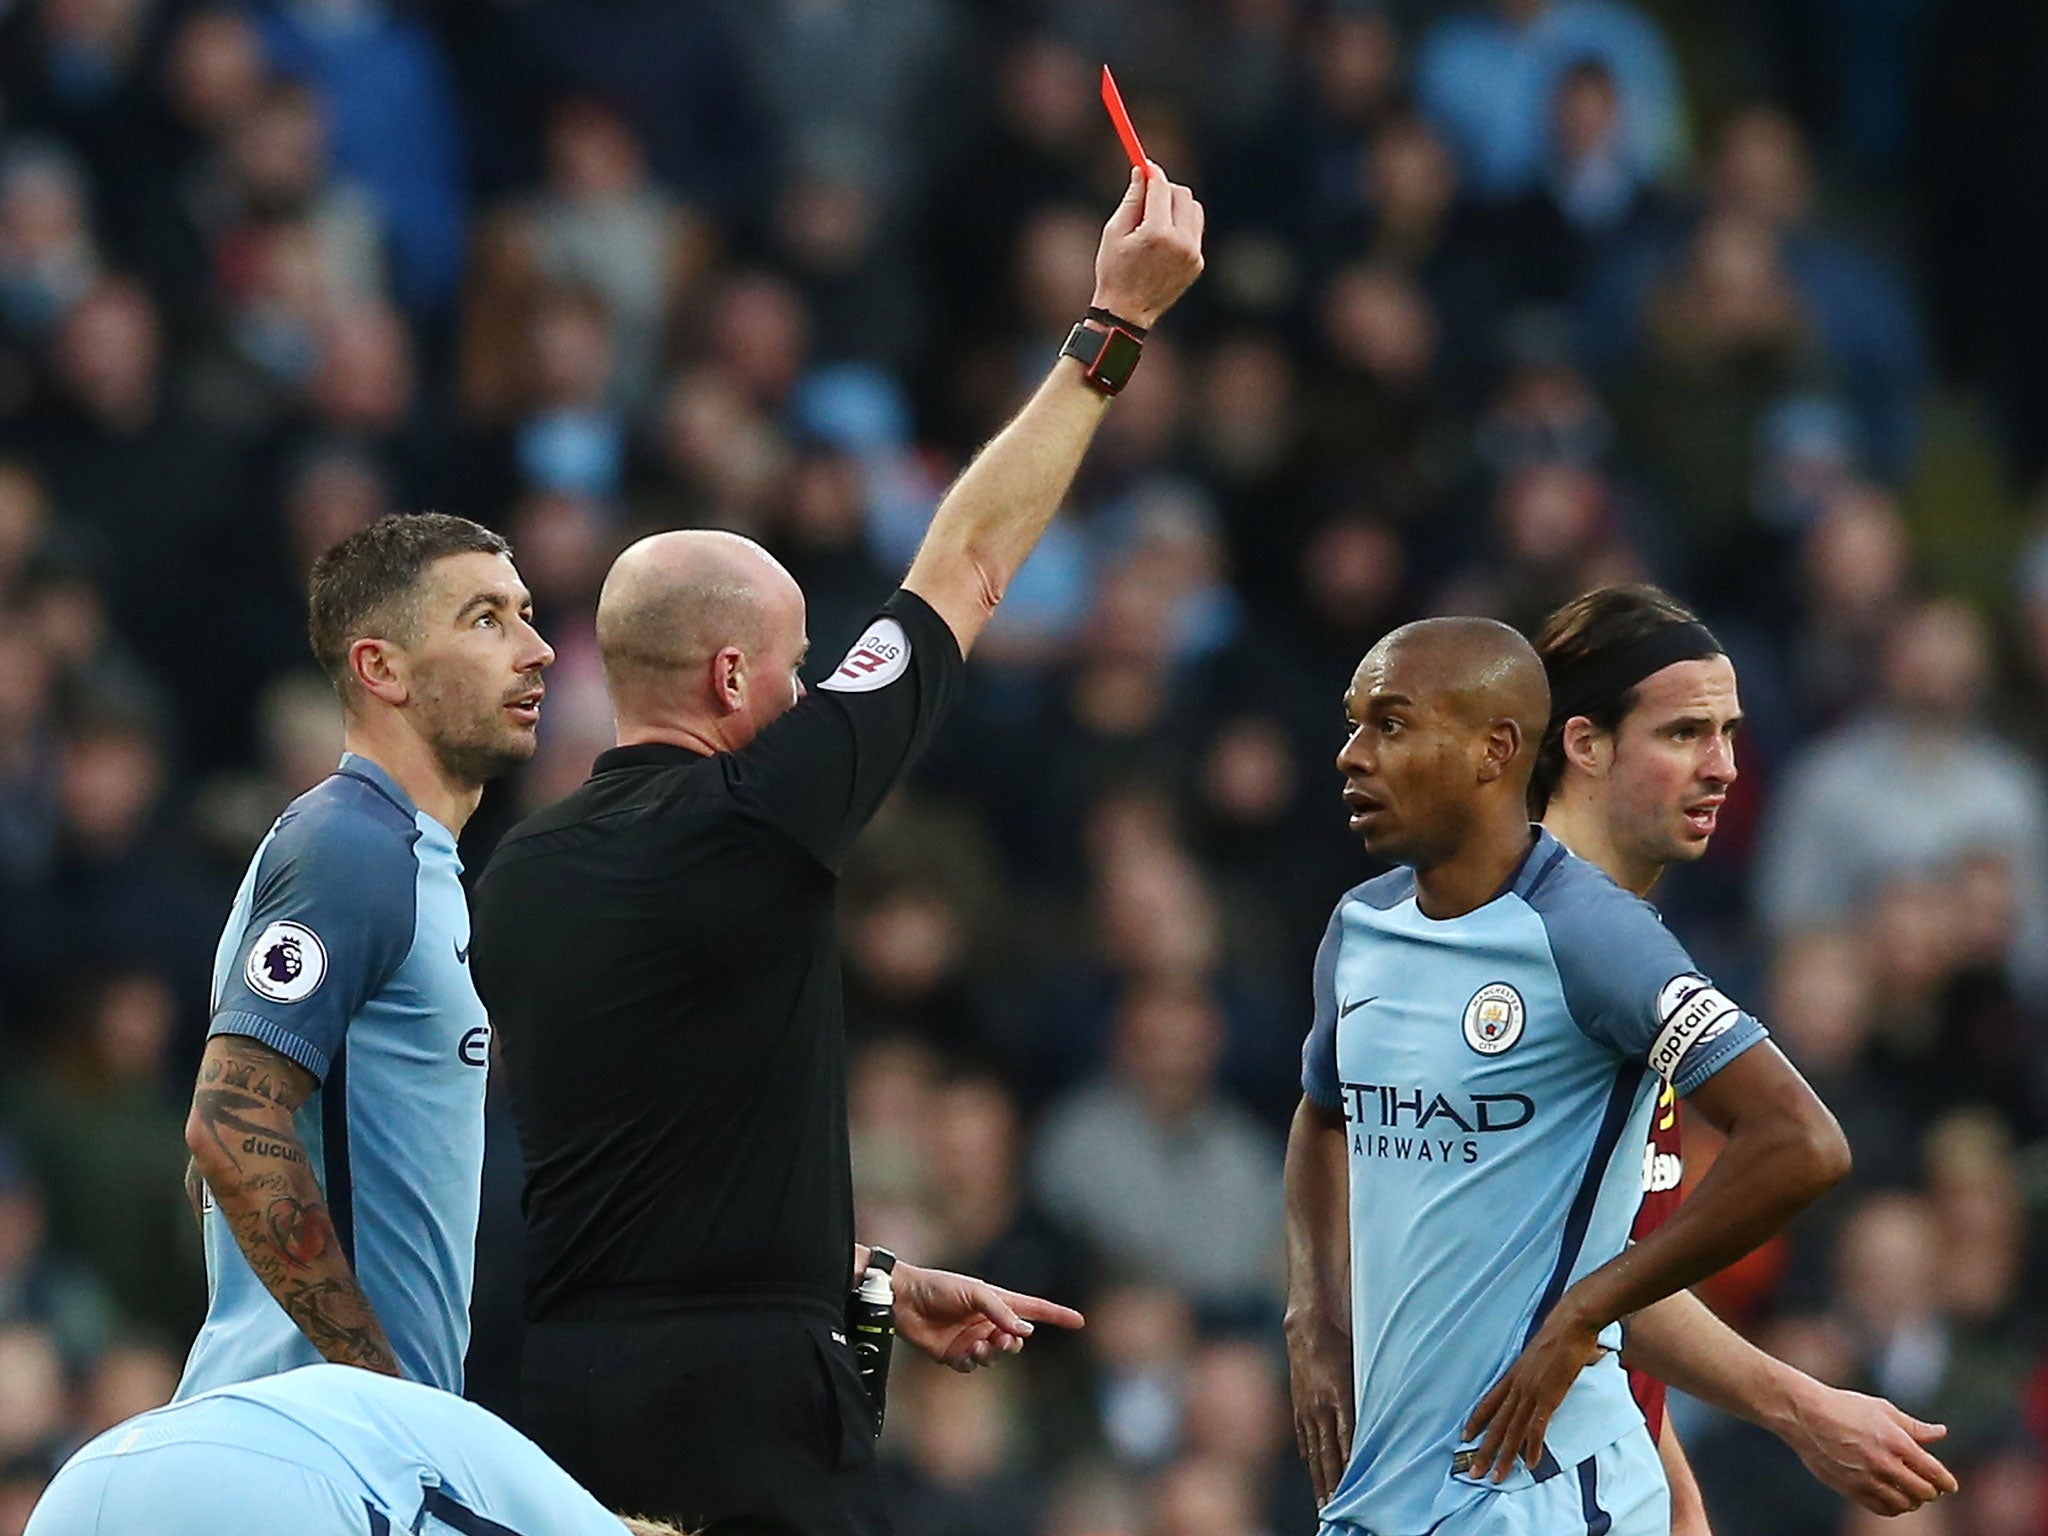 Despite his transgressions, Guardiola claimed that Fernandinho is "one of the nicest guys" has ever met